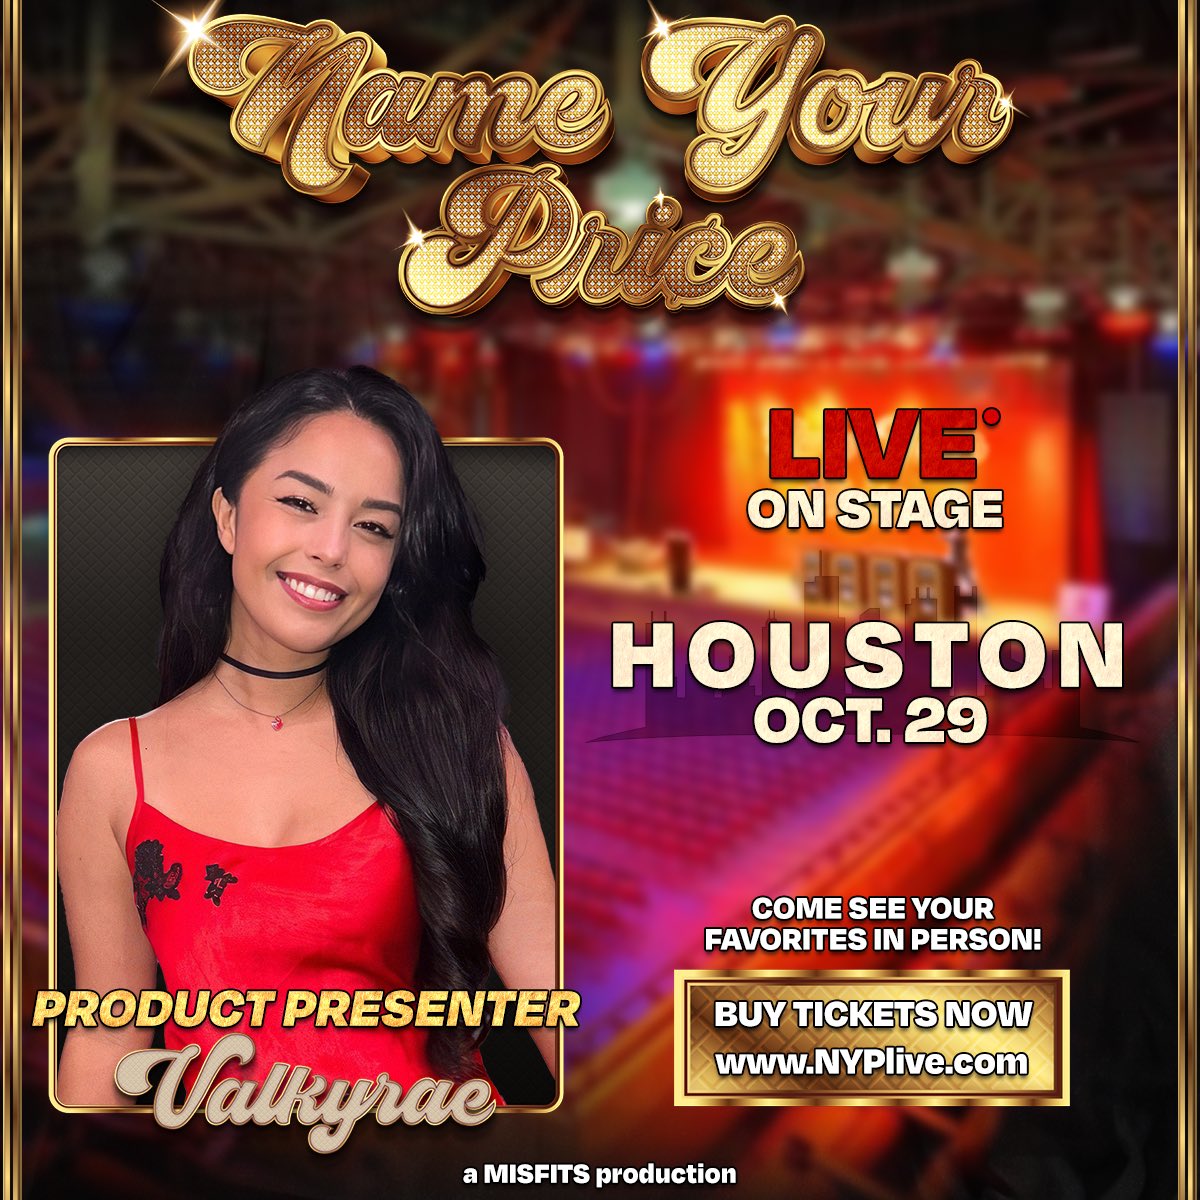 NAME YOUR PRICE HOUSTON PRODUCT PRESENTER @Valkyrae COME SEE US LIVE IN PERSON ON OCTOBER 29TH GET YOUR TICKETS HERE- bit.ly/HoustonNYP